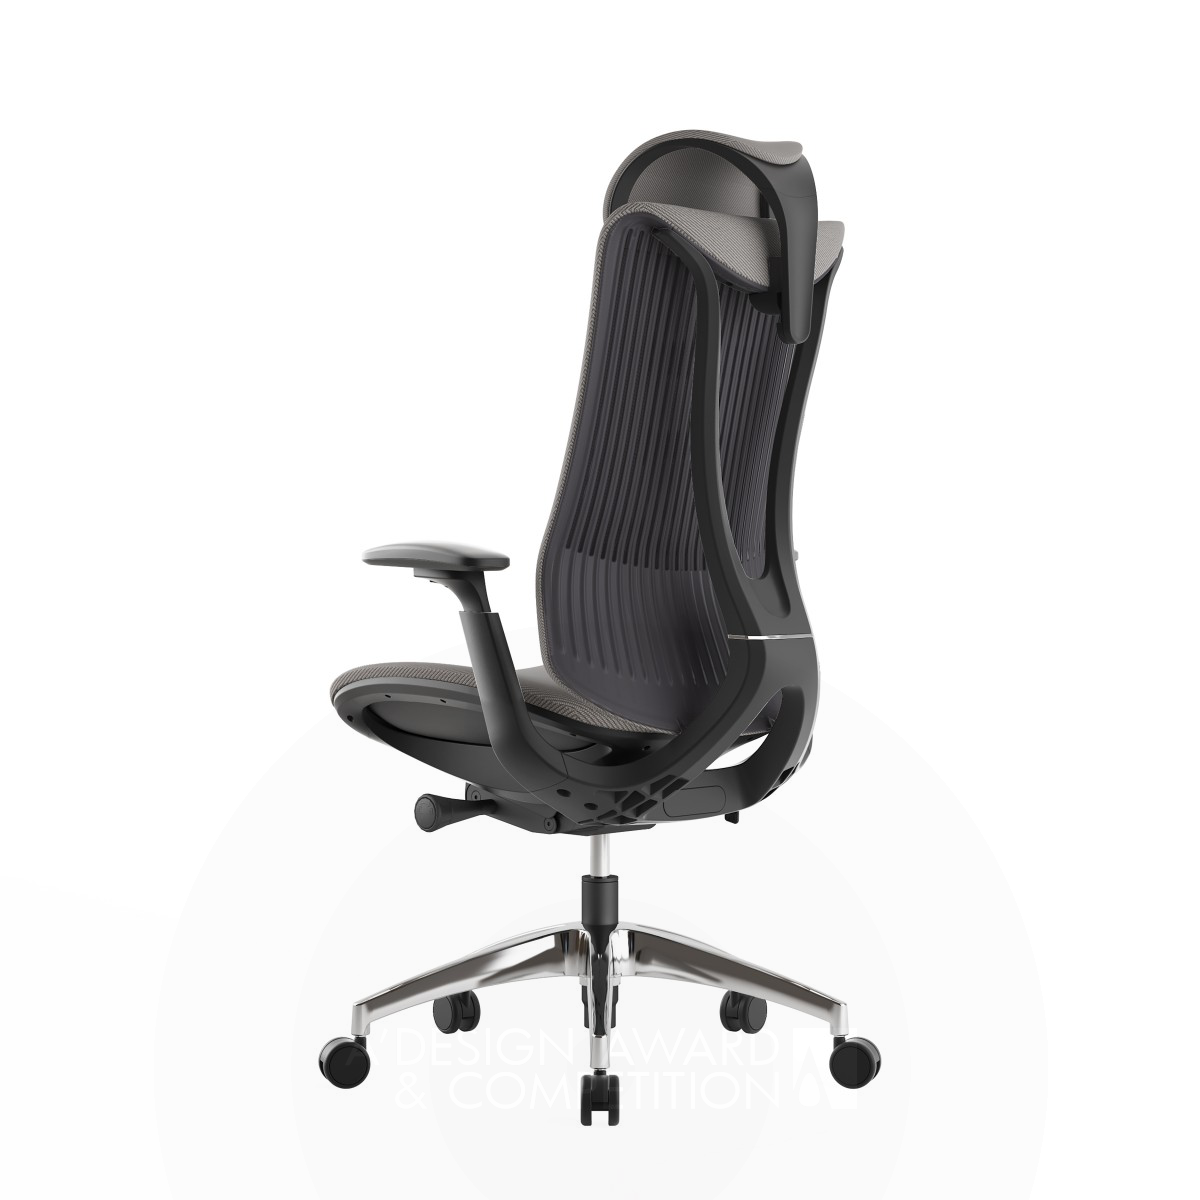 KOHO R&D Team wins Silver at the prestigious A' Office Furniture Design Award with Icloud Office Chair.